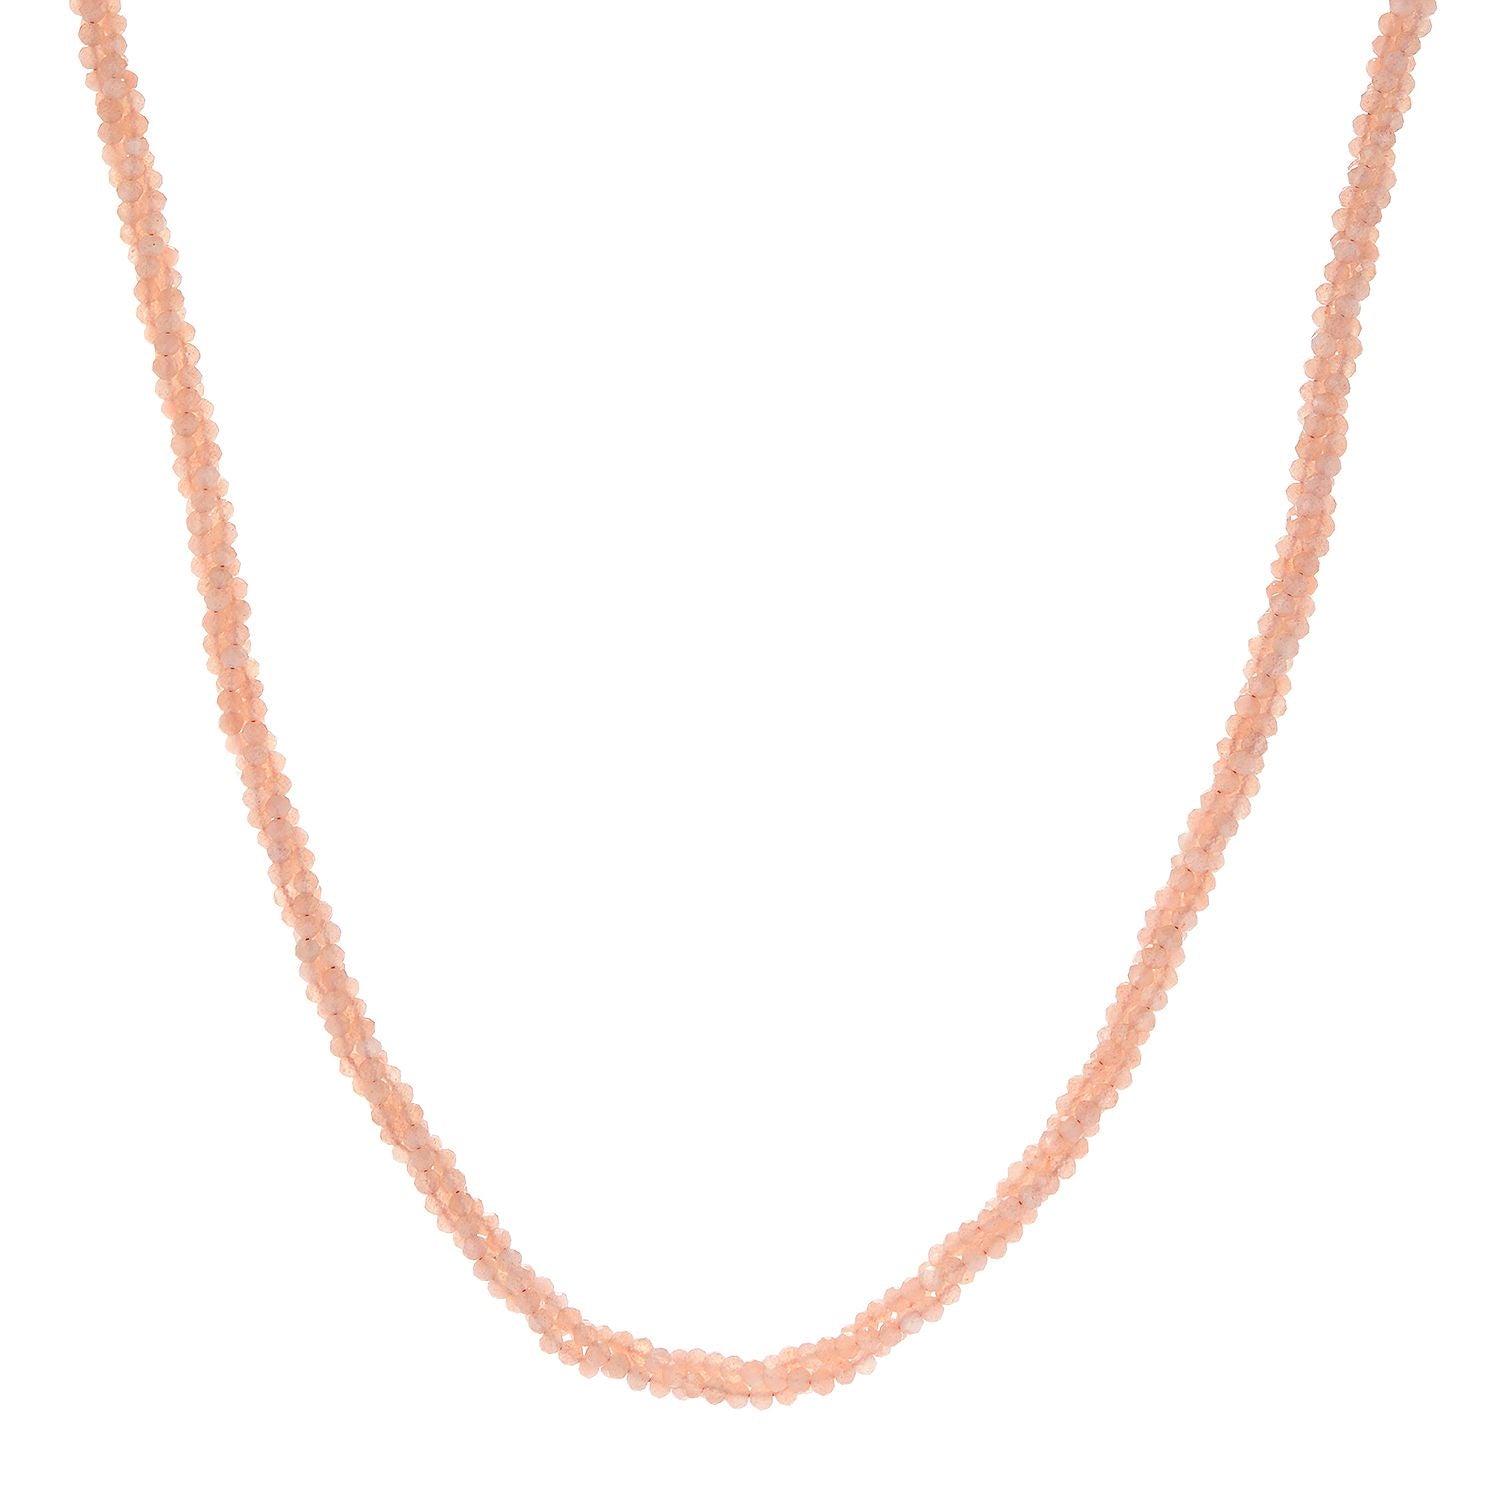 925 Sterling Silver Peach Moonstone Necklace - Pinctore